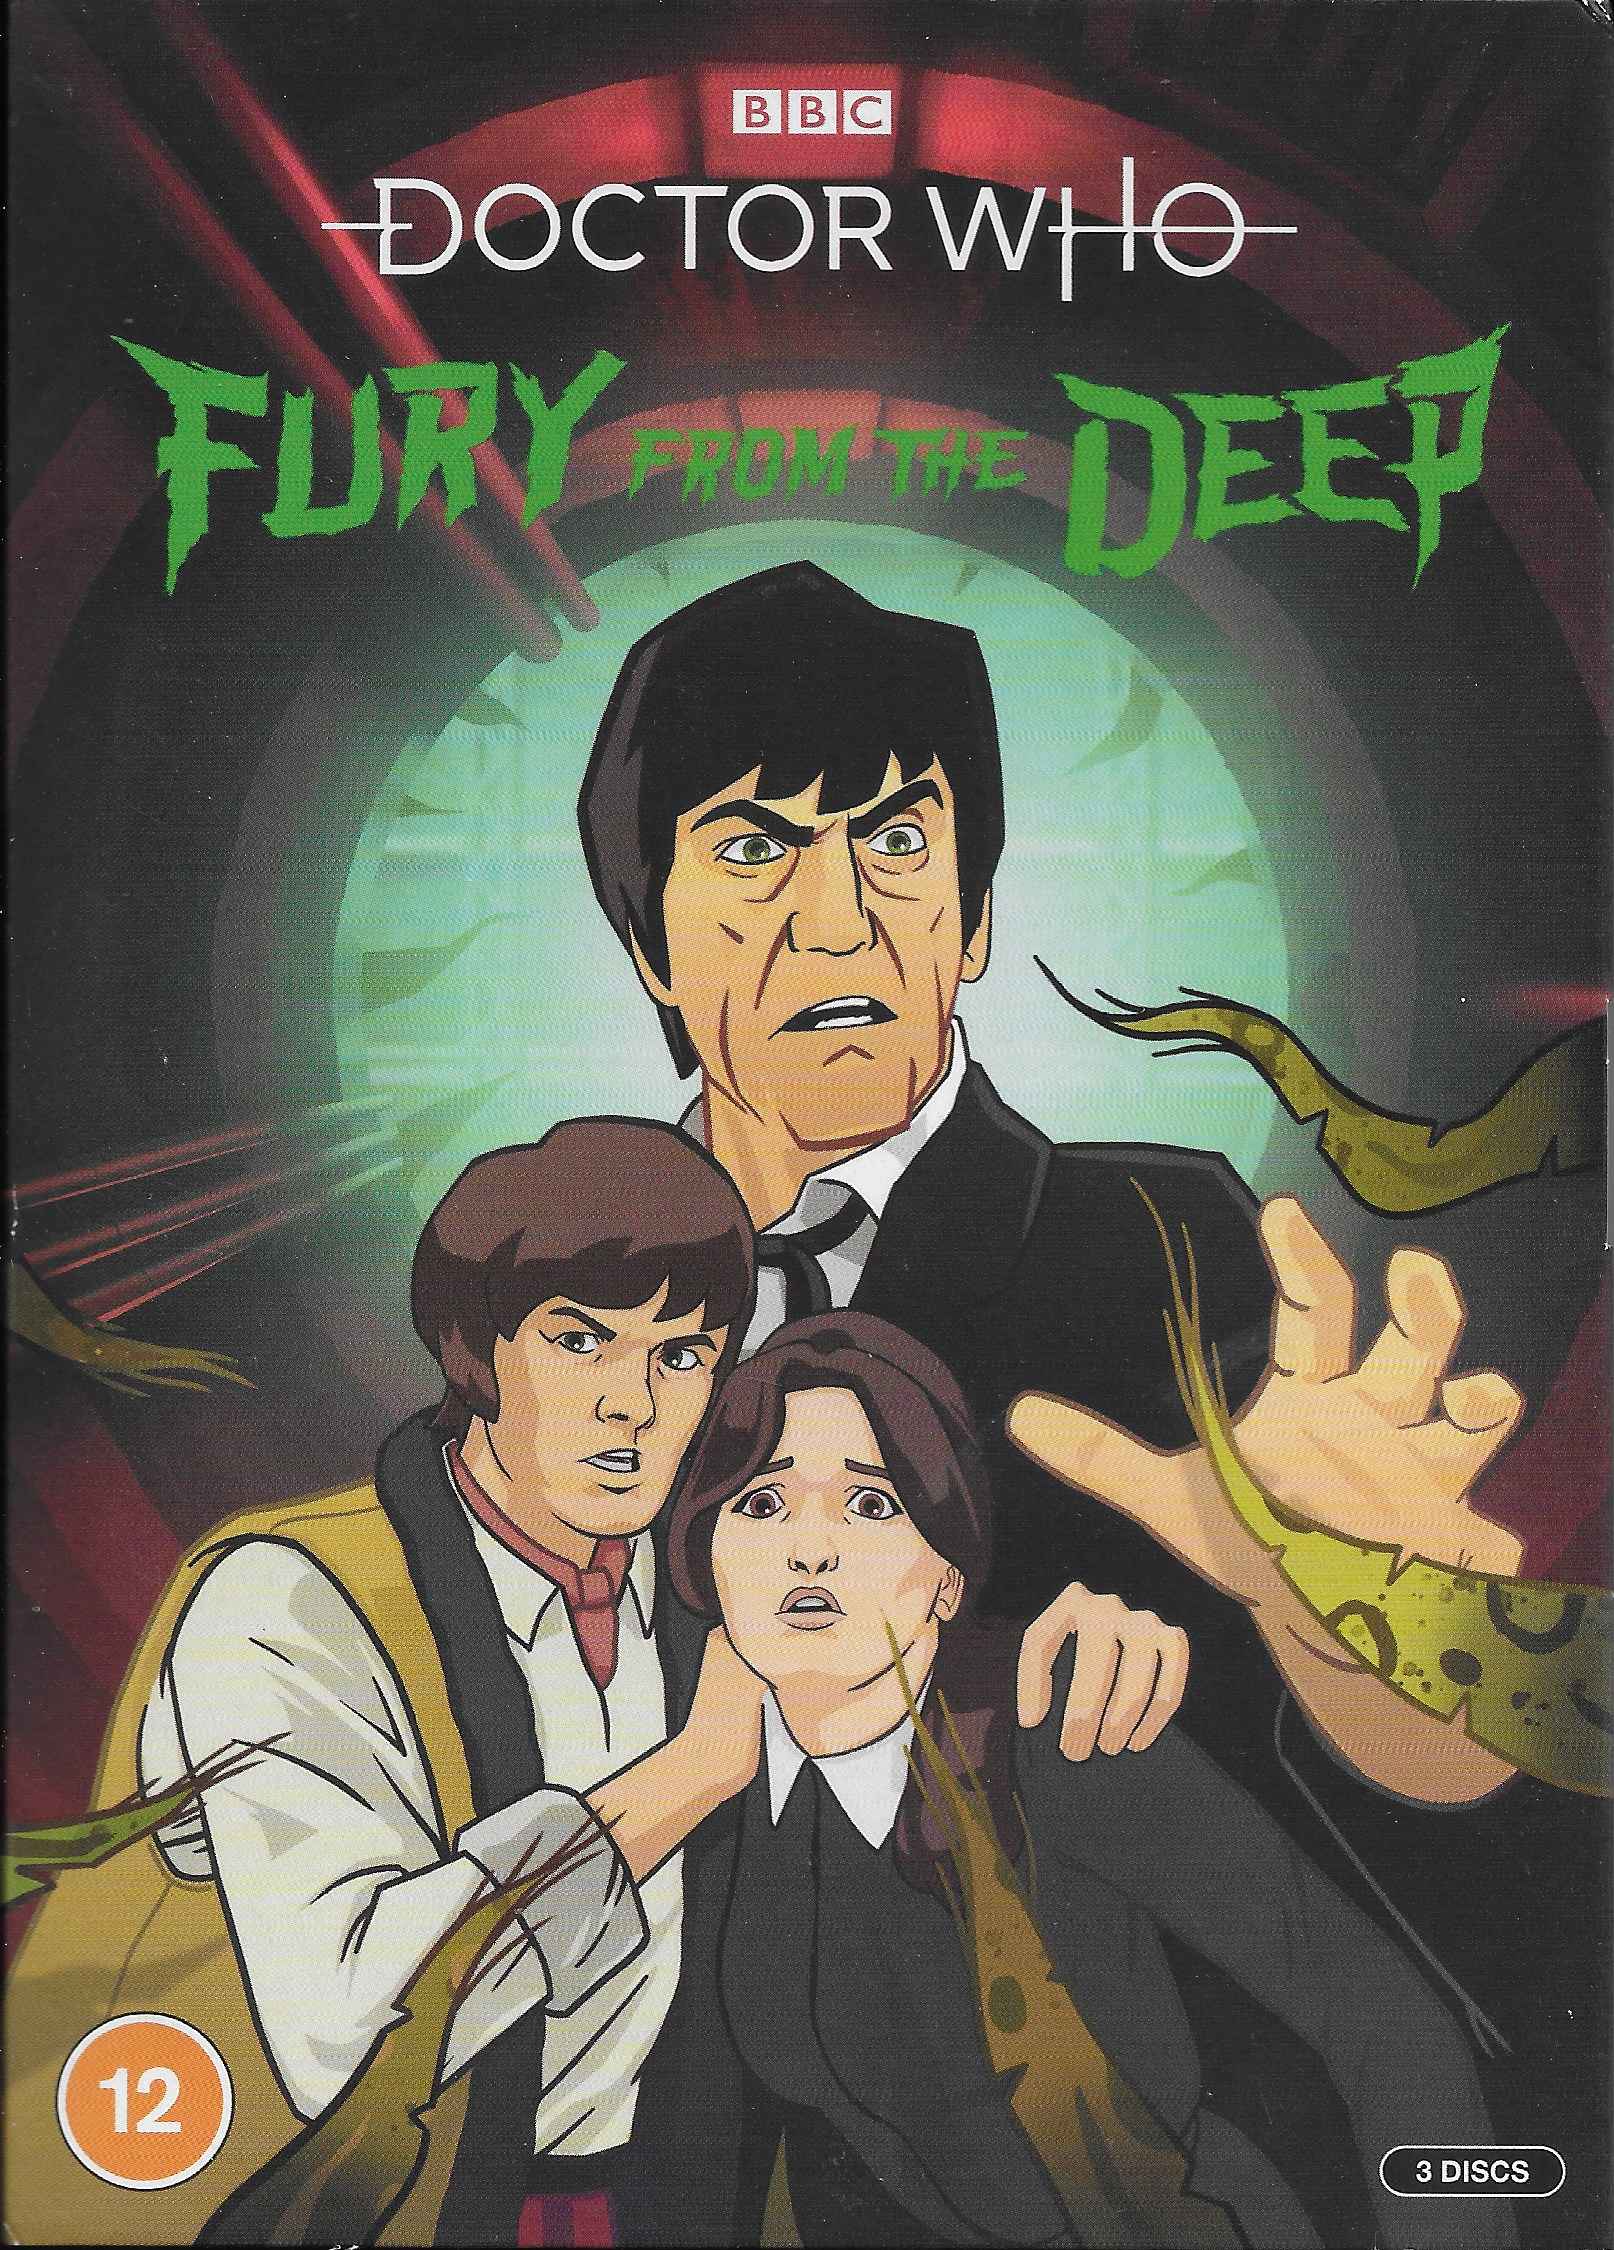 Picture of BBCDVD 4428 Doctor Who - Fury from the deep by artist Victor Pemberton from the BBC dvds - Records and Tapes library